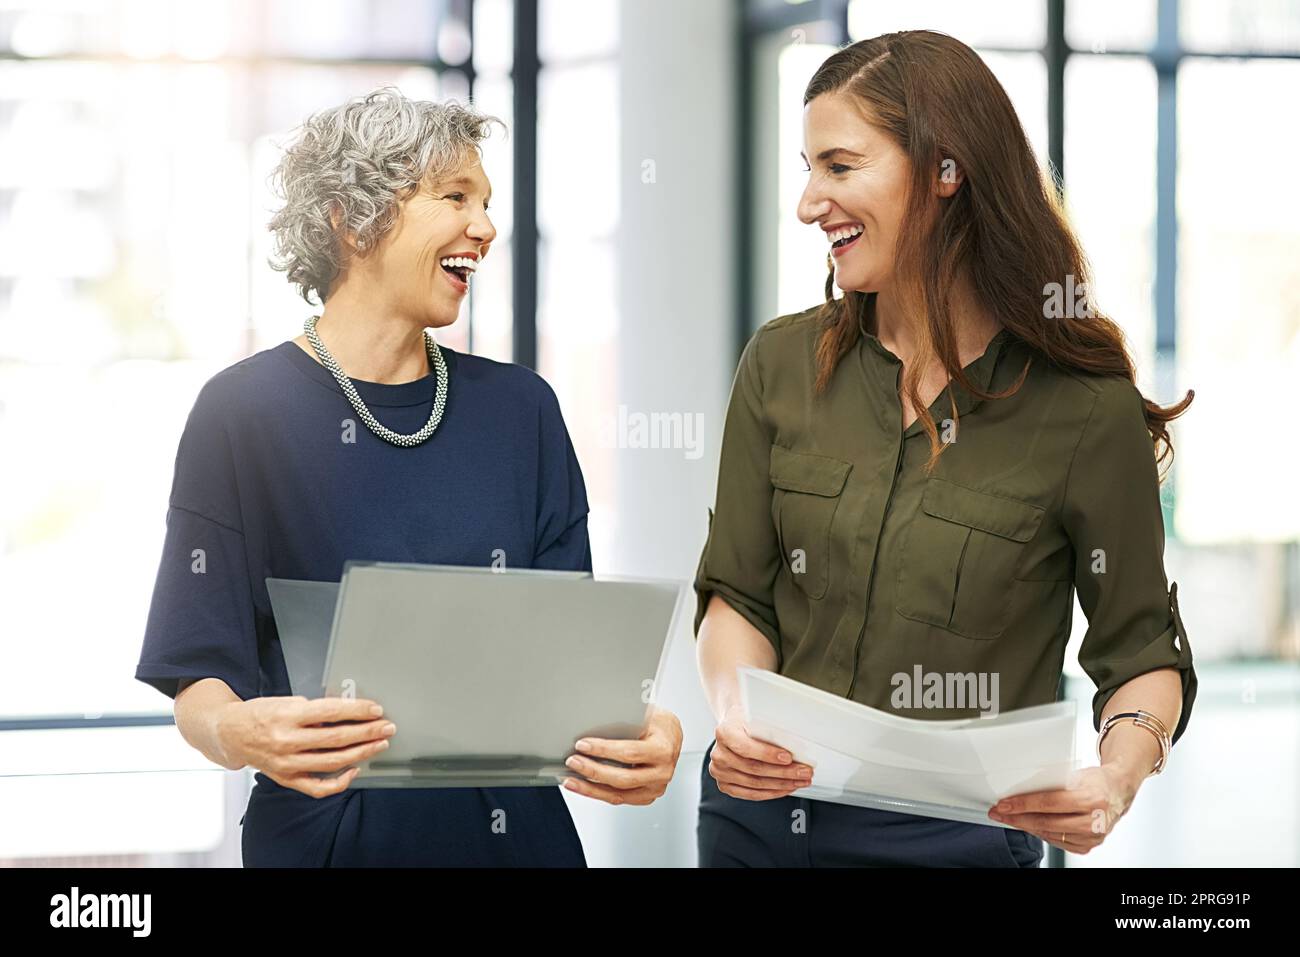 Achieving excellence together. two colleagues working together in an office. Stock Photo